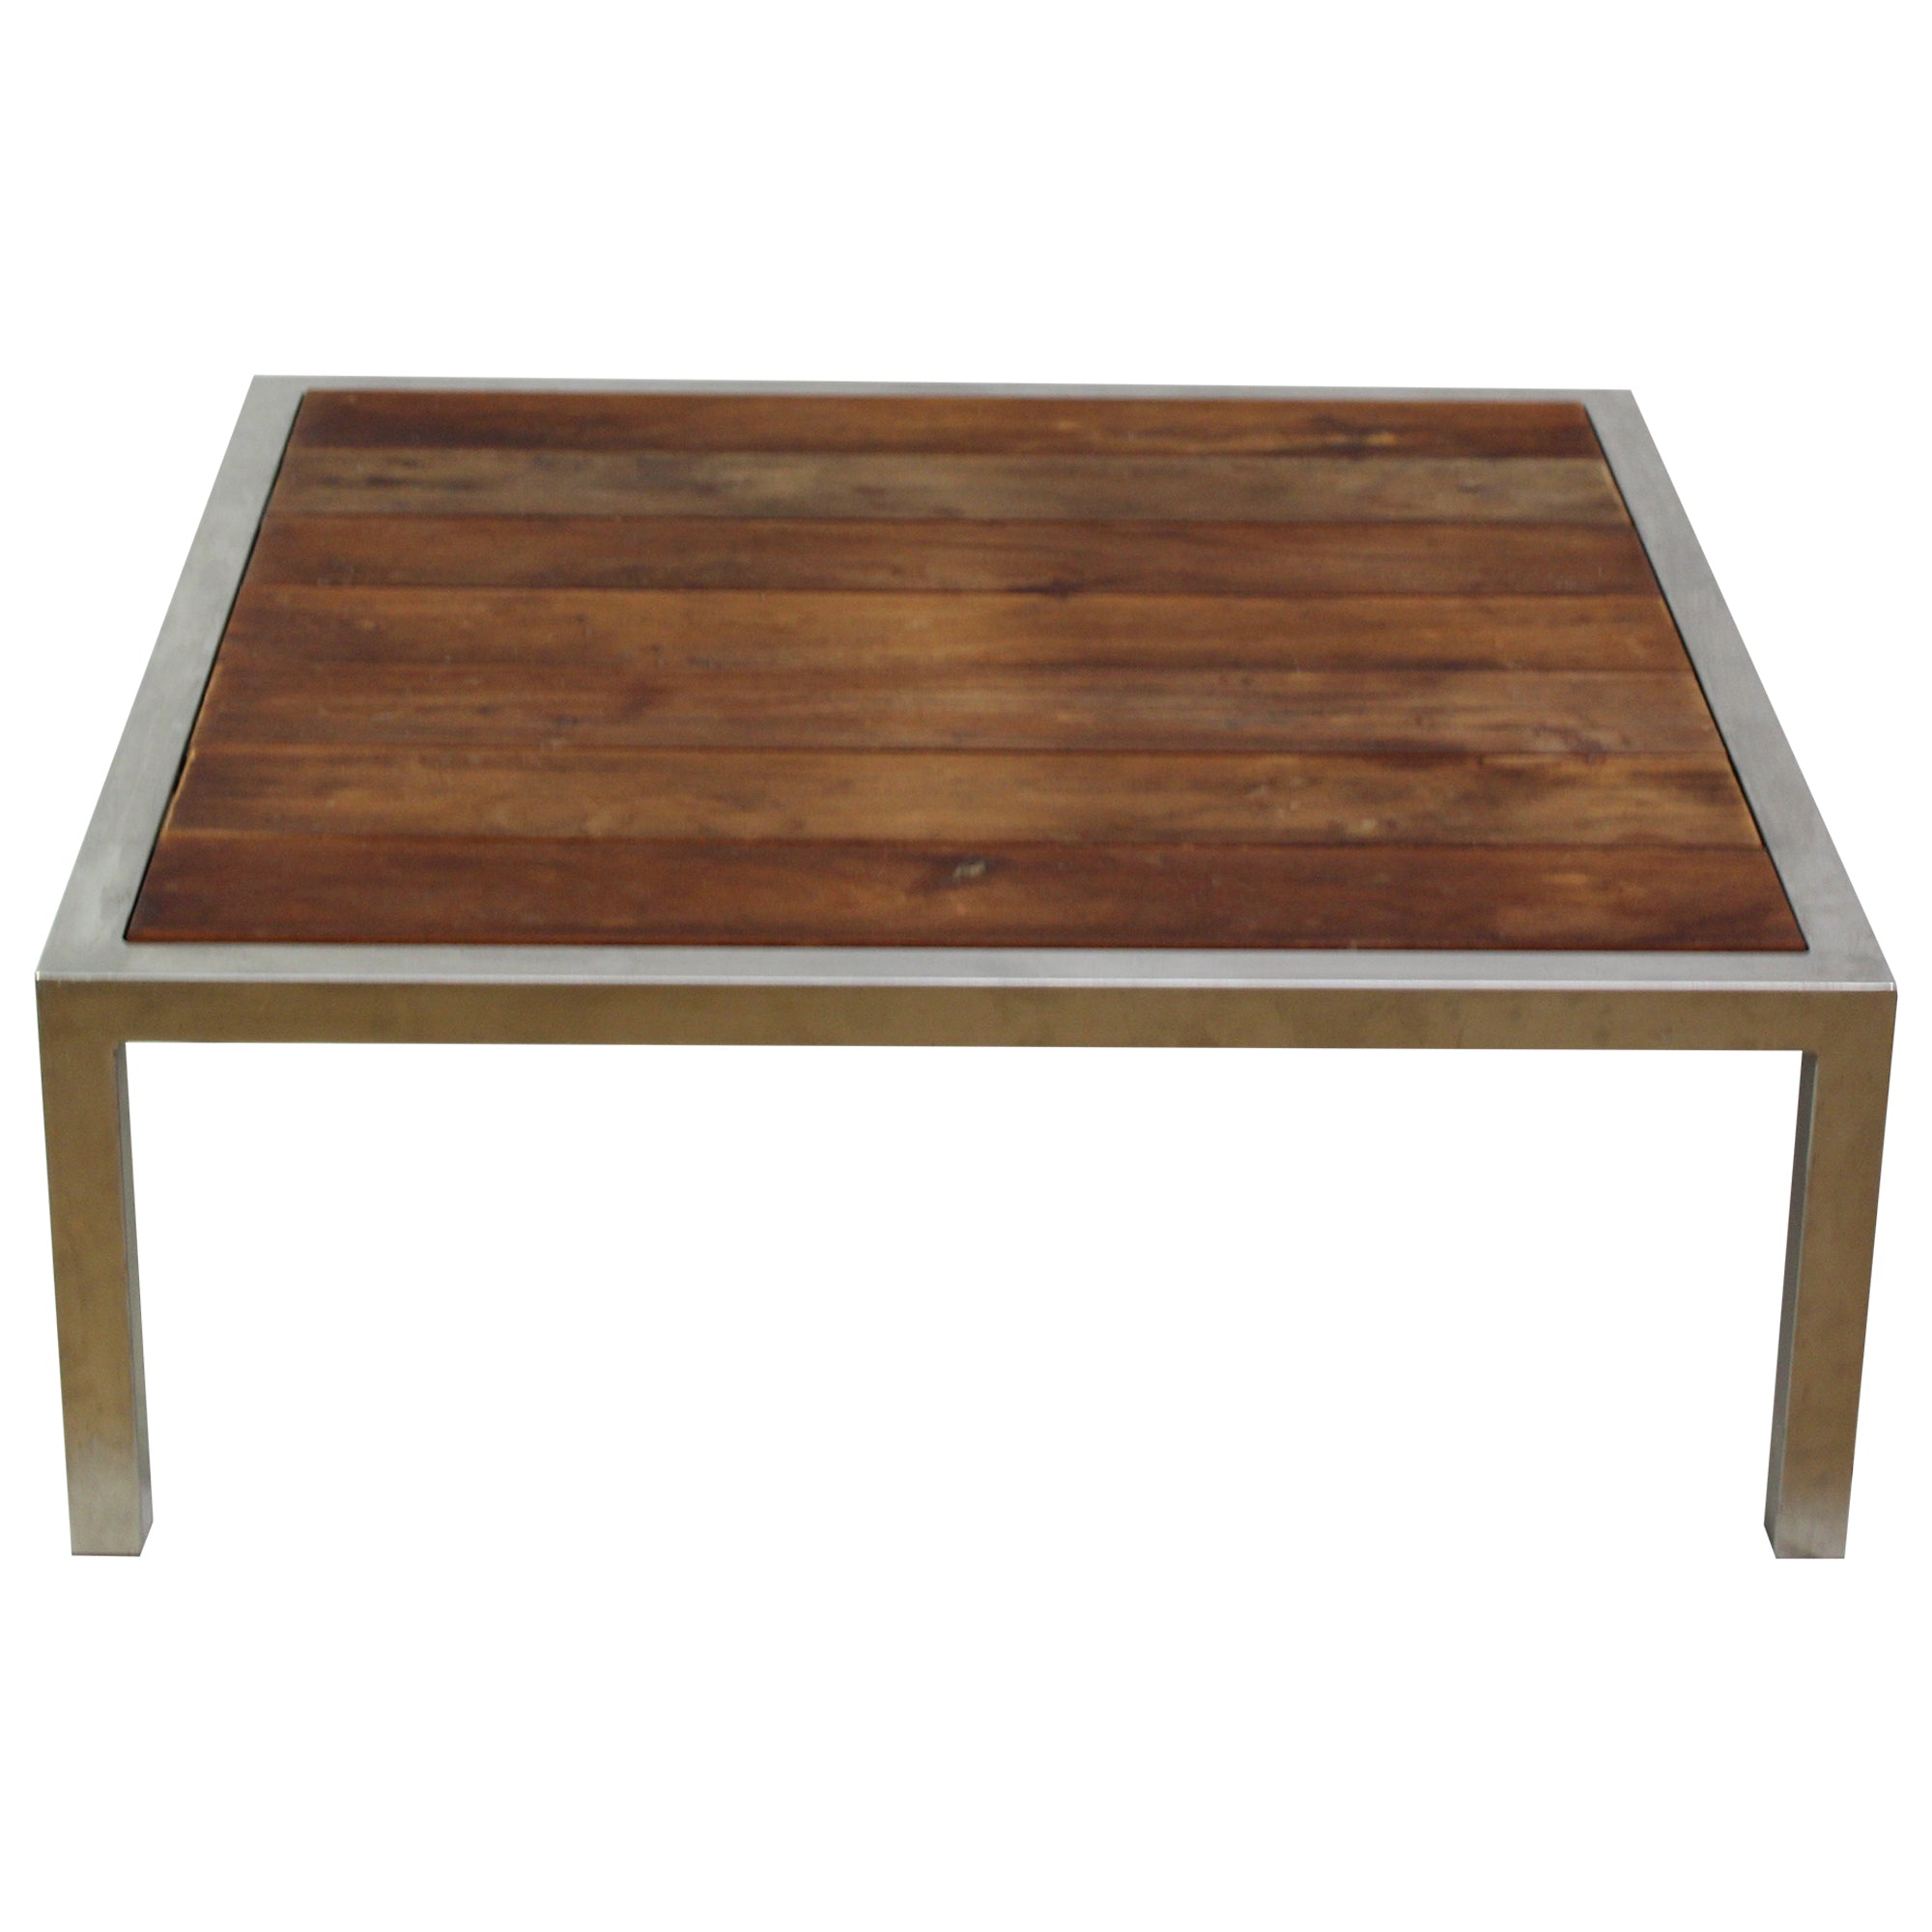 Industrial Coffee Table - Preowned